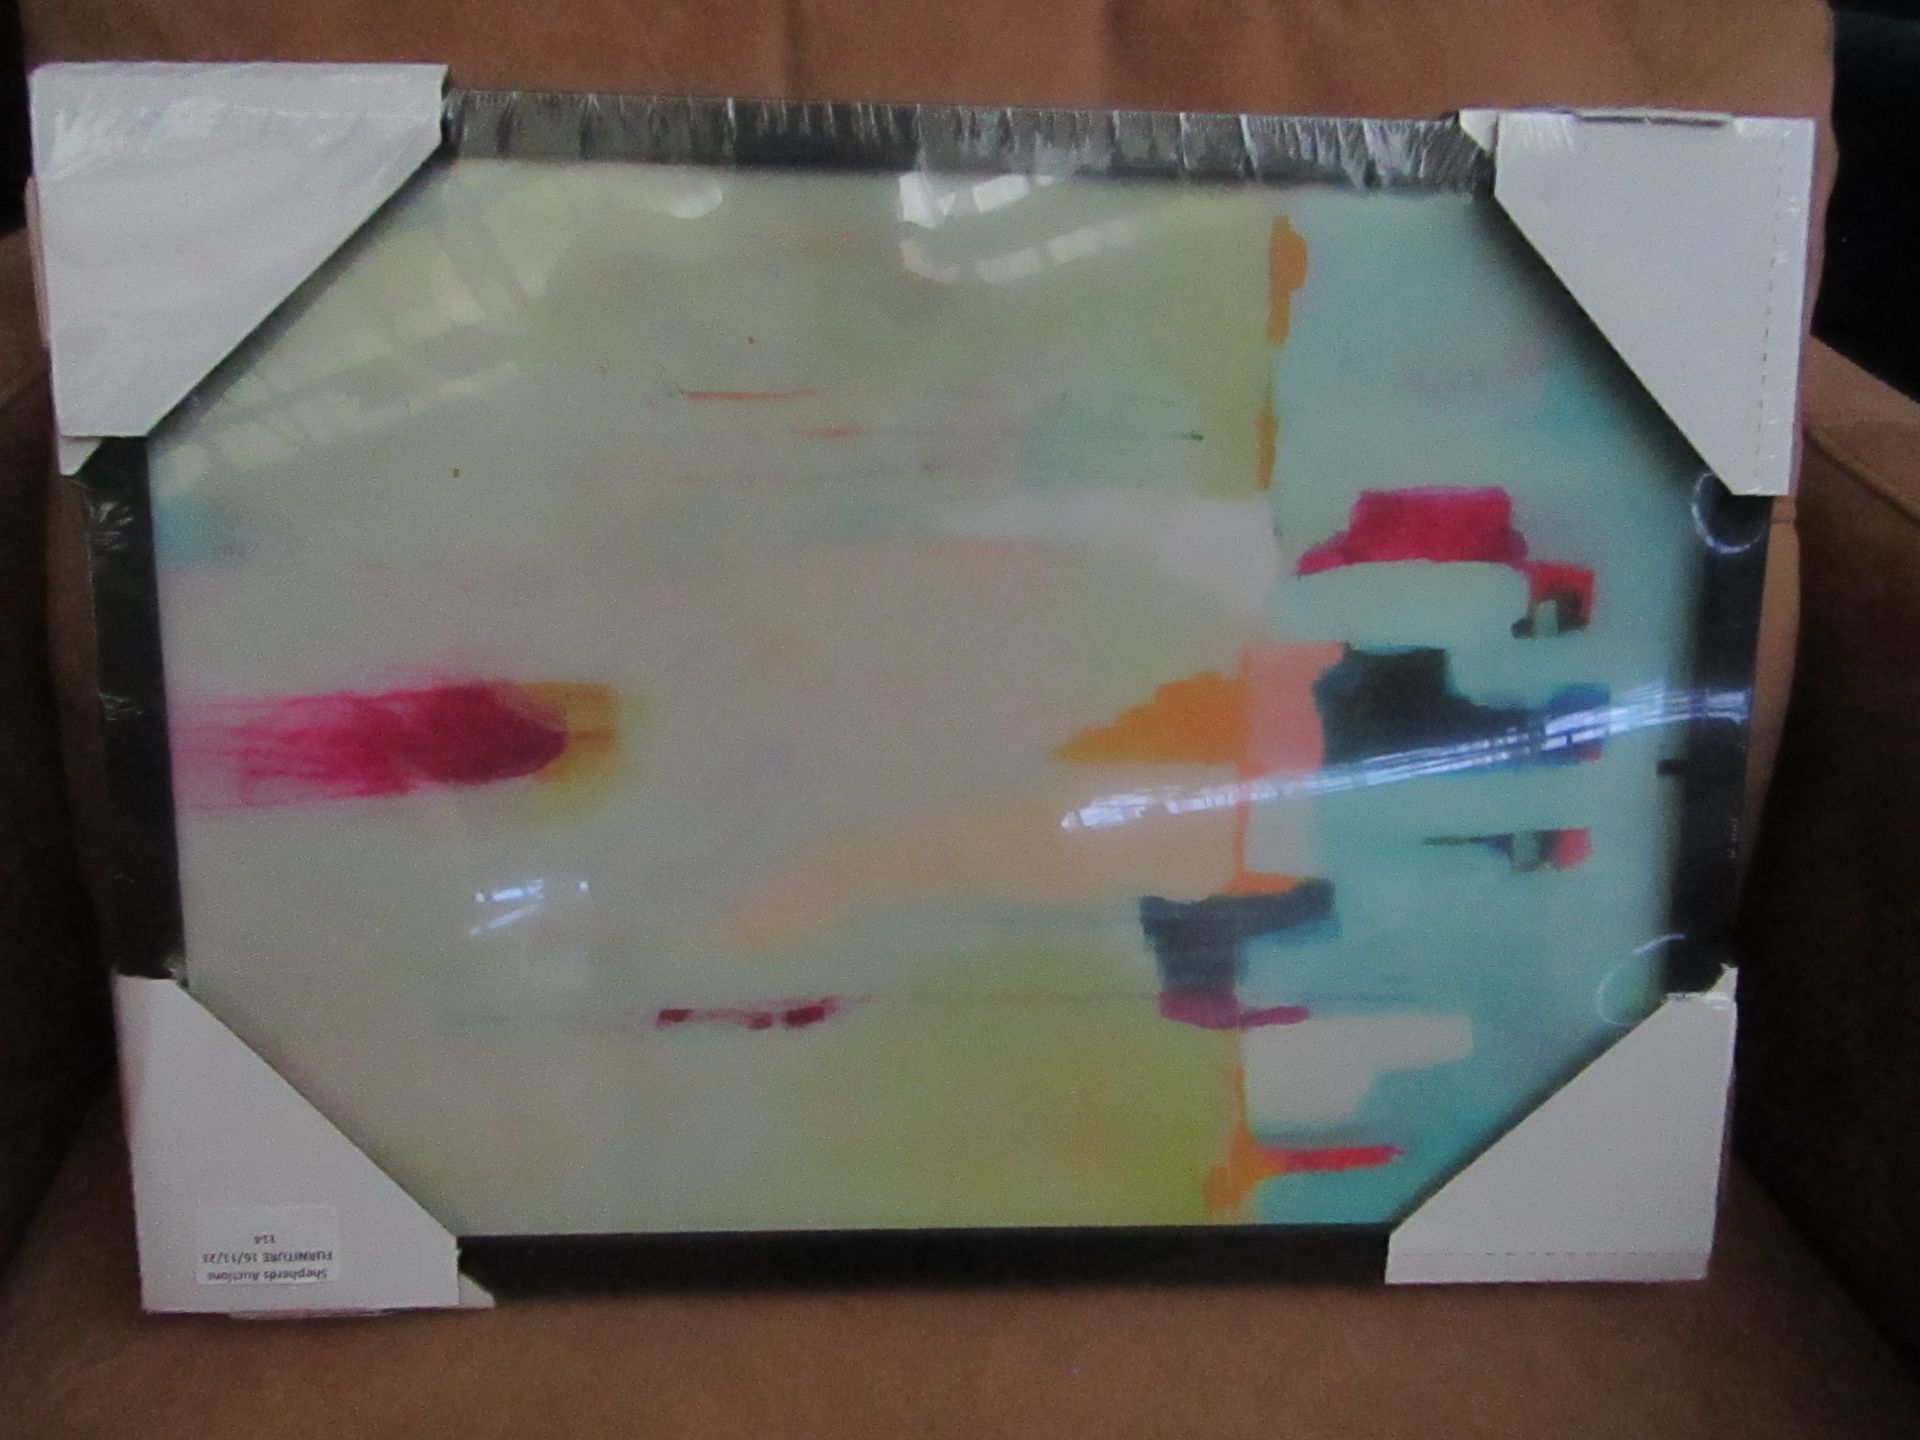 | 1X | MADE.COM CANVAS PRINT | SEE PICTURE FOR DESIGN | GOOD CONDITION & BOXED |